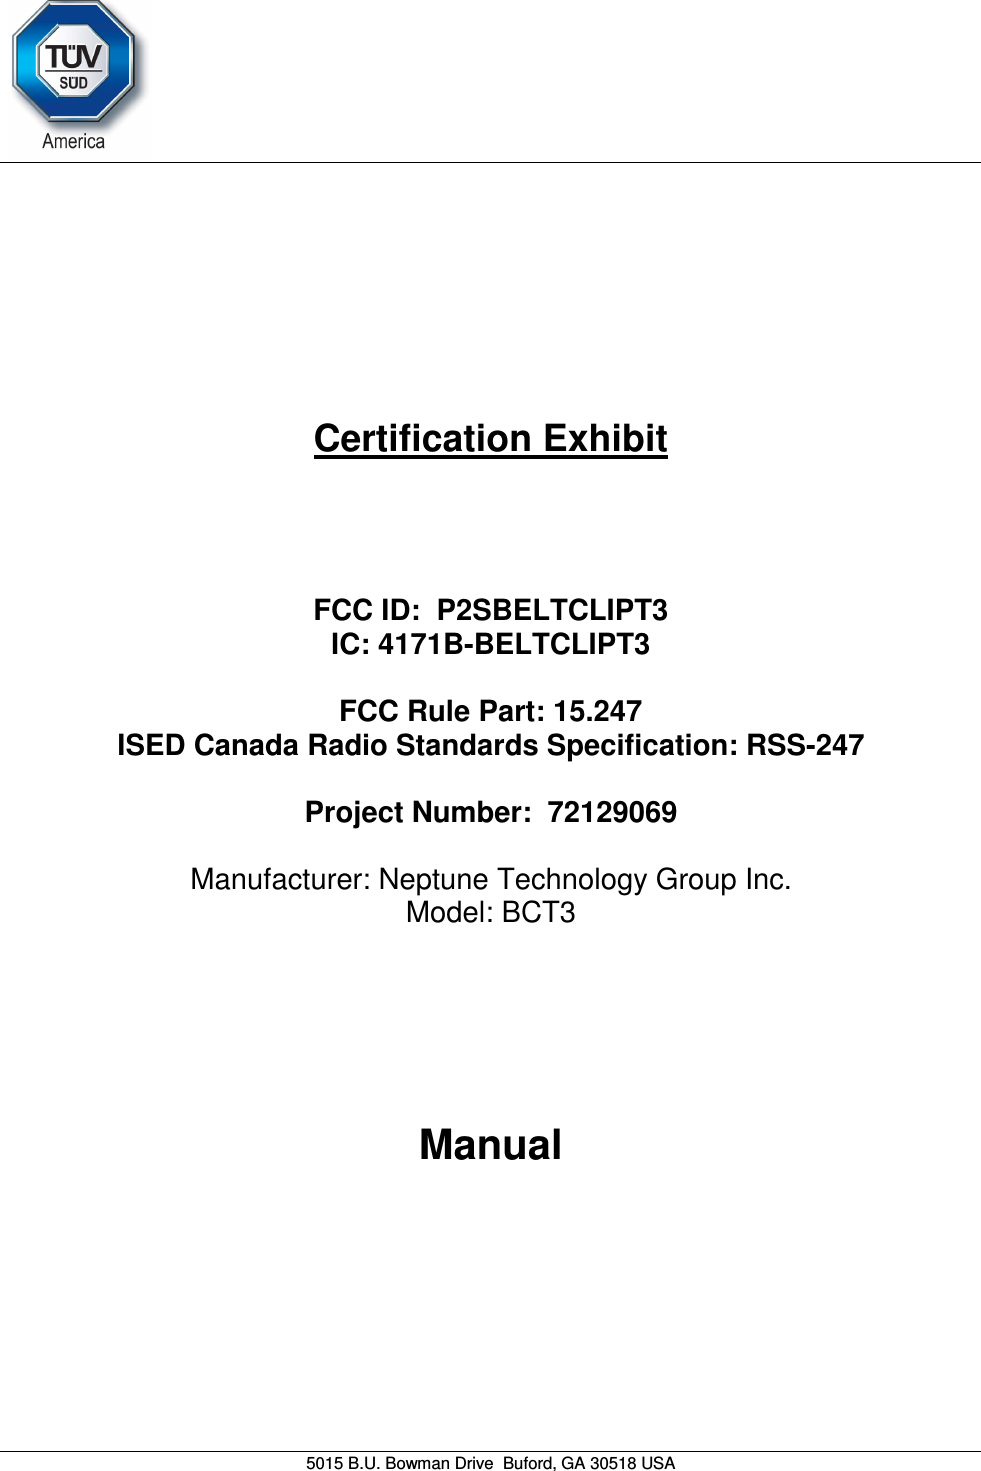     5015 B.U. Bowman Drive  Buford, GA 30518 USA   Certification Exhibit     FCC ID:  P2SBELTCLIPT3 IC: 4171B-BELTCLIPT3  FCC Rule Part: 15.247 ISED Canada Radio Standards Specification: RSS-247  Project Number:  72129069   Manufacturer: Neptune Technology Group Inc. Model: BCT3     Manual   